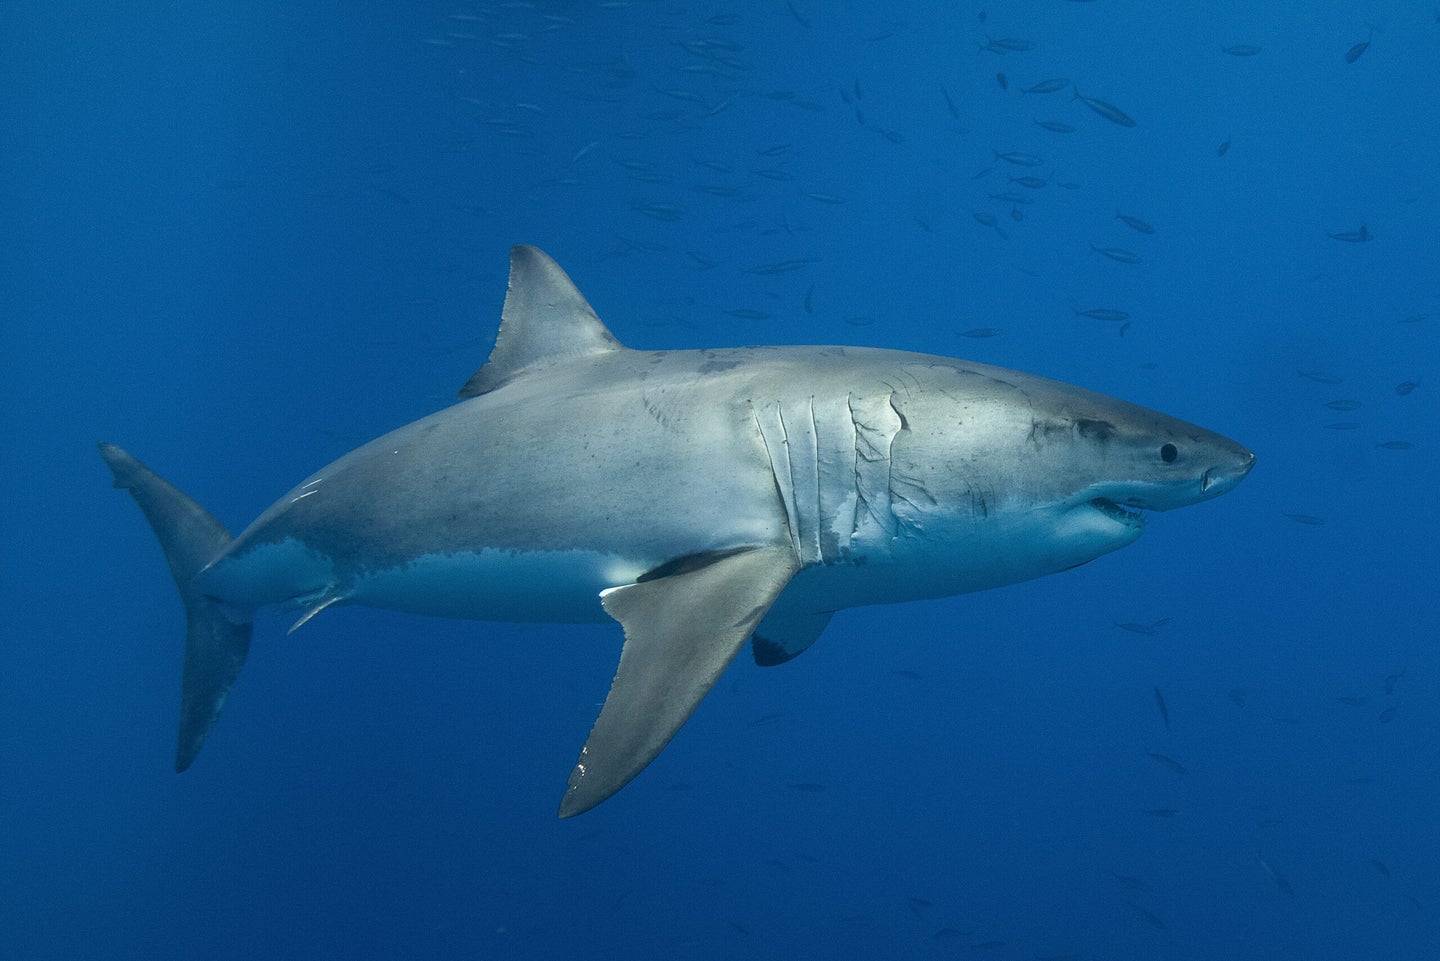 Great white shark that has the potential to bite a swimmer that it mistakes for a seal